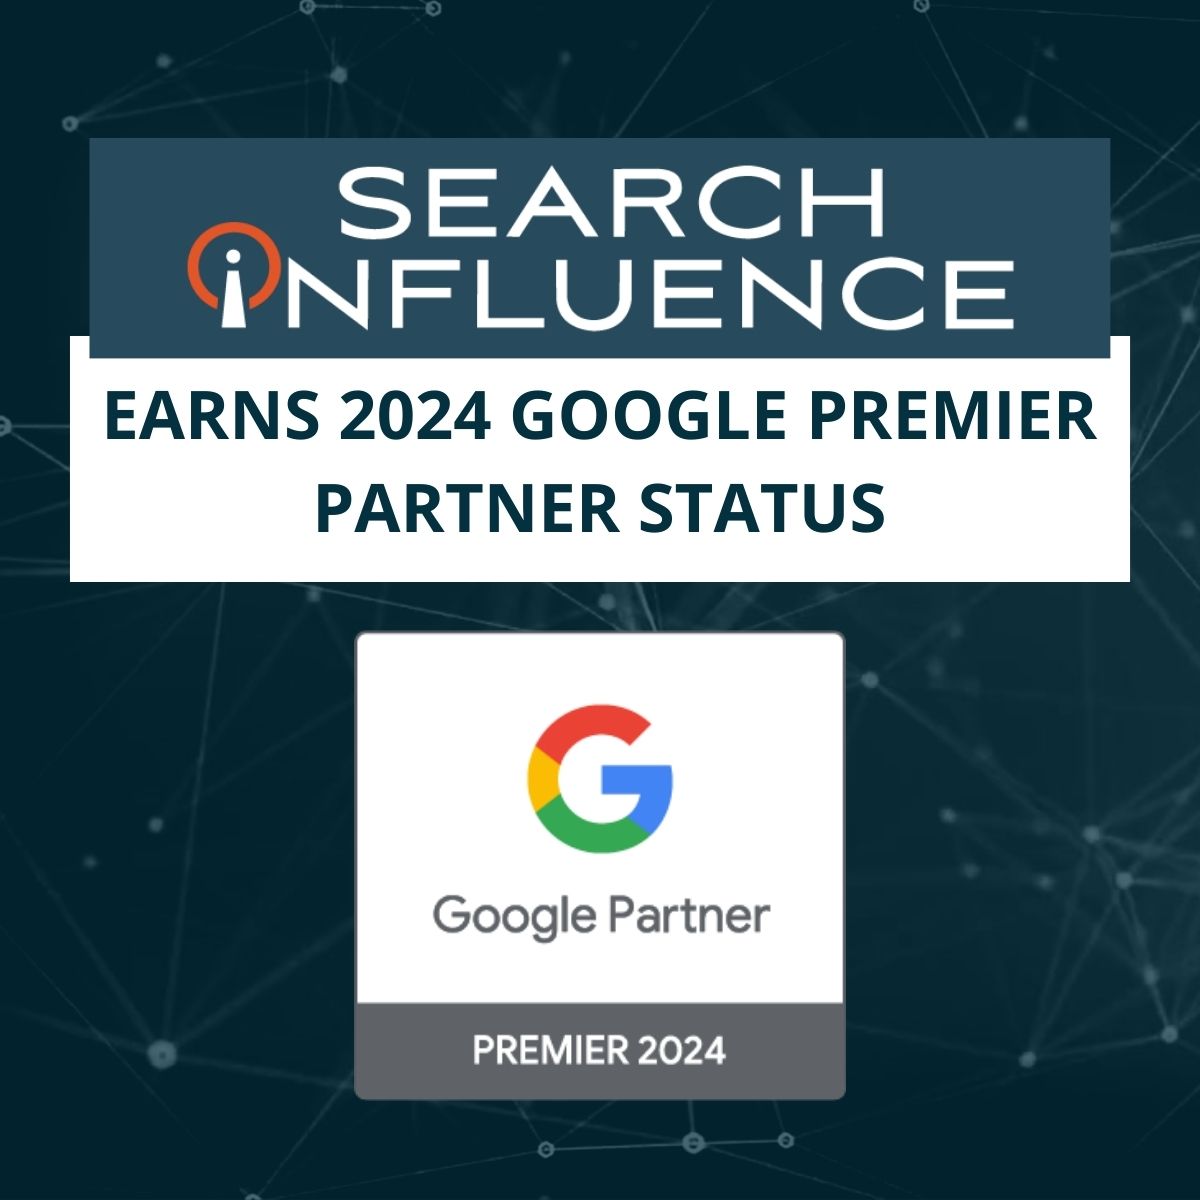 Search Influence, SEO and Digital Marketing Agency, Earns 2024 Google Premier Partner Status